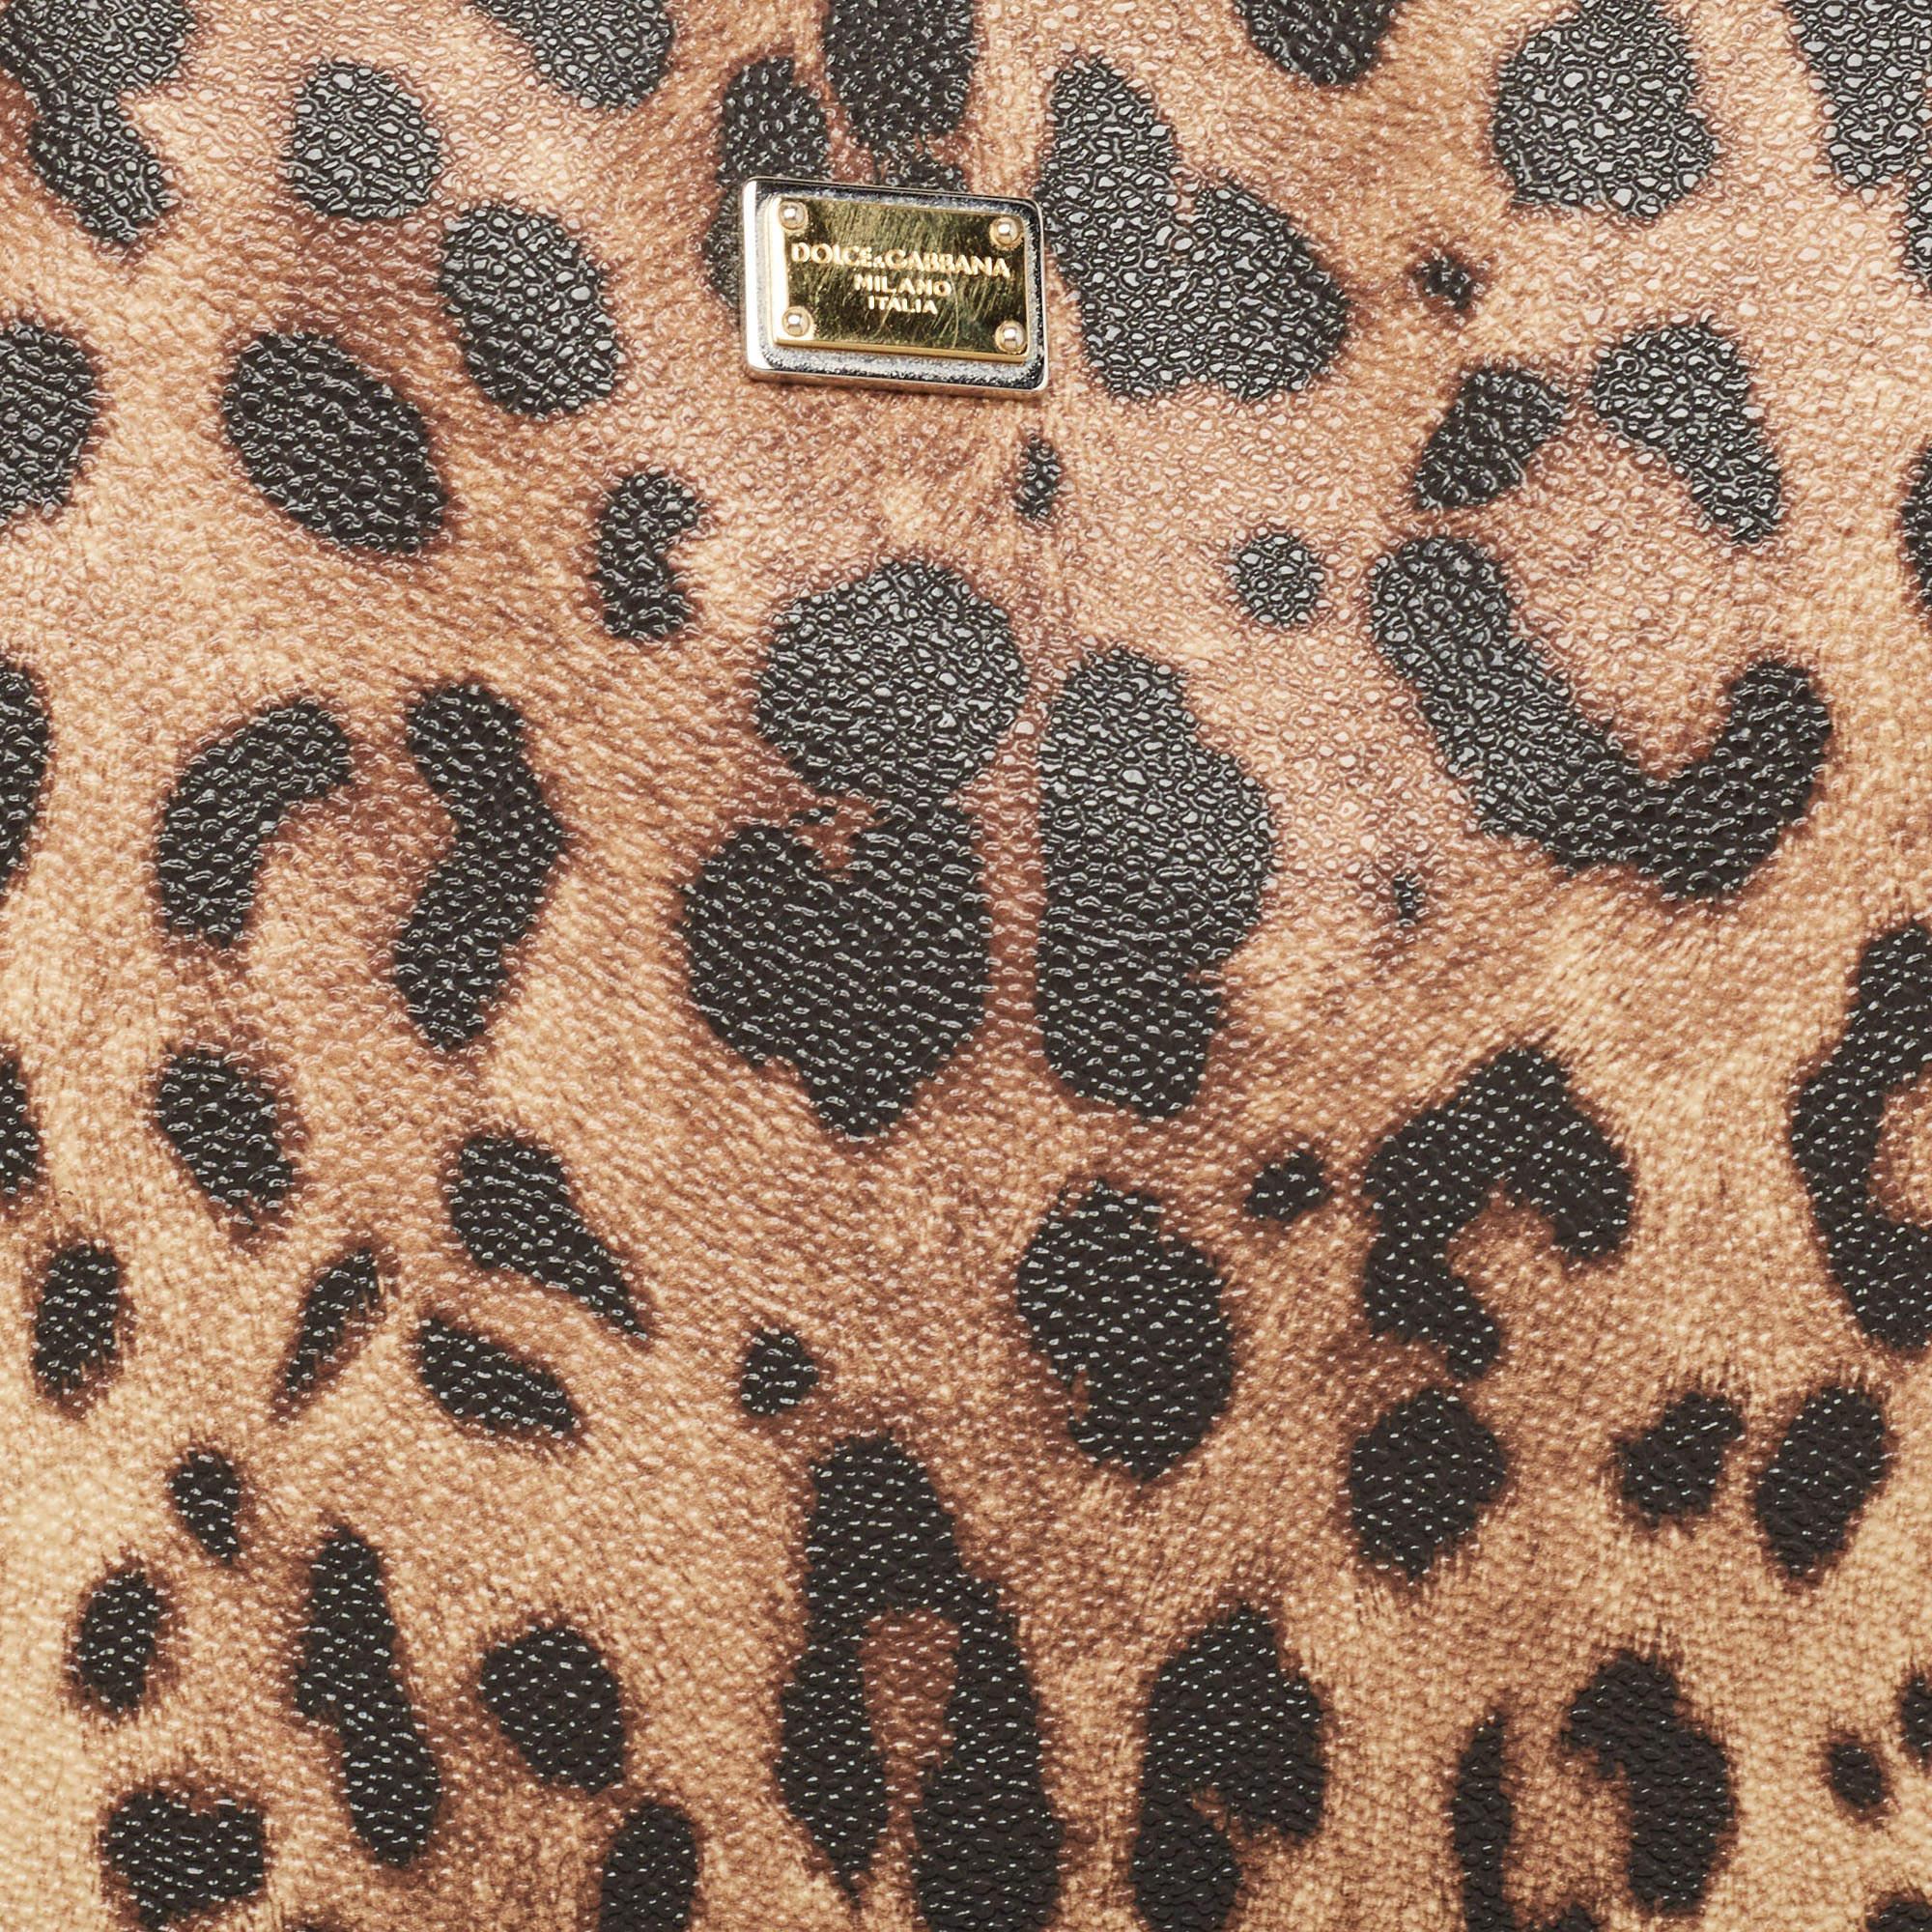 Dolce & Gabbana Leopard Print Coated Canvas and Leather Miss Escape Zip Tote 2